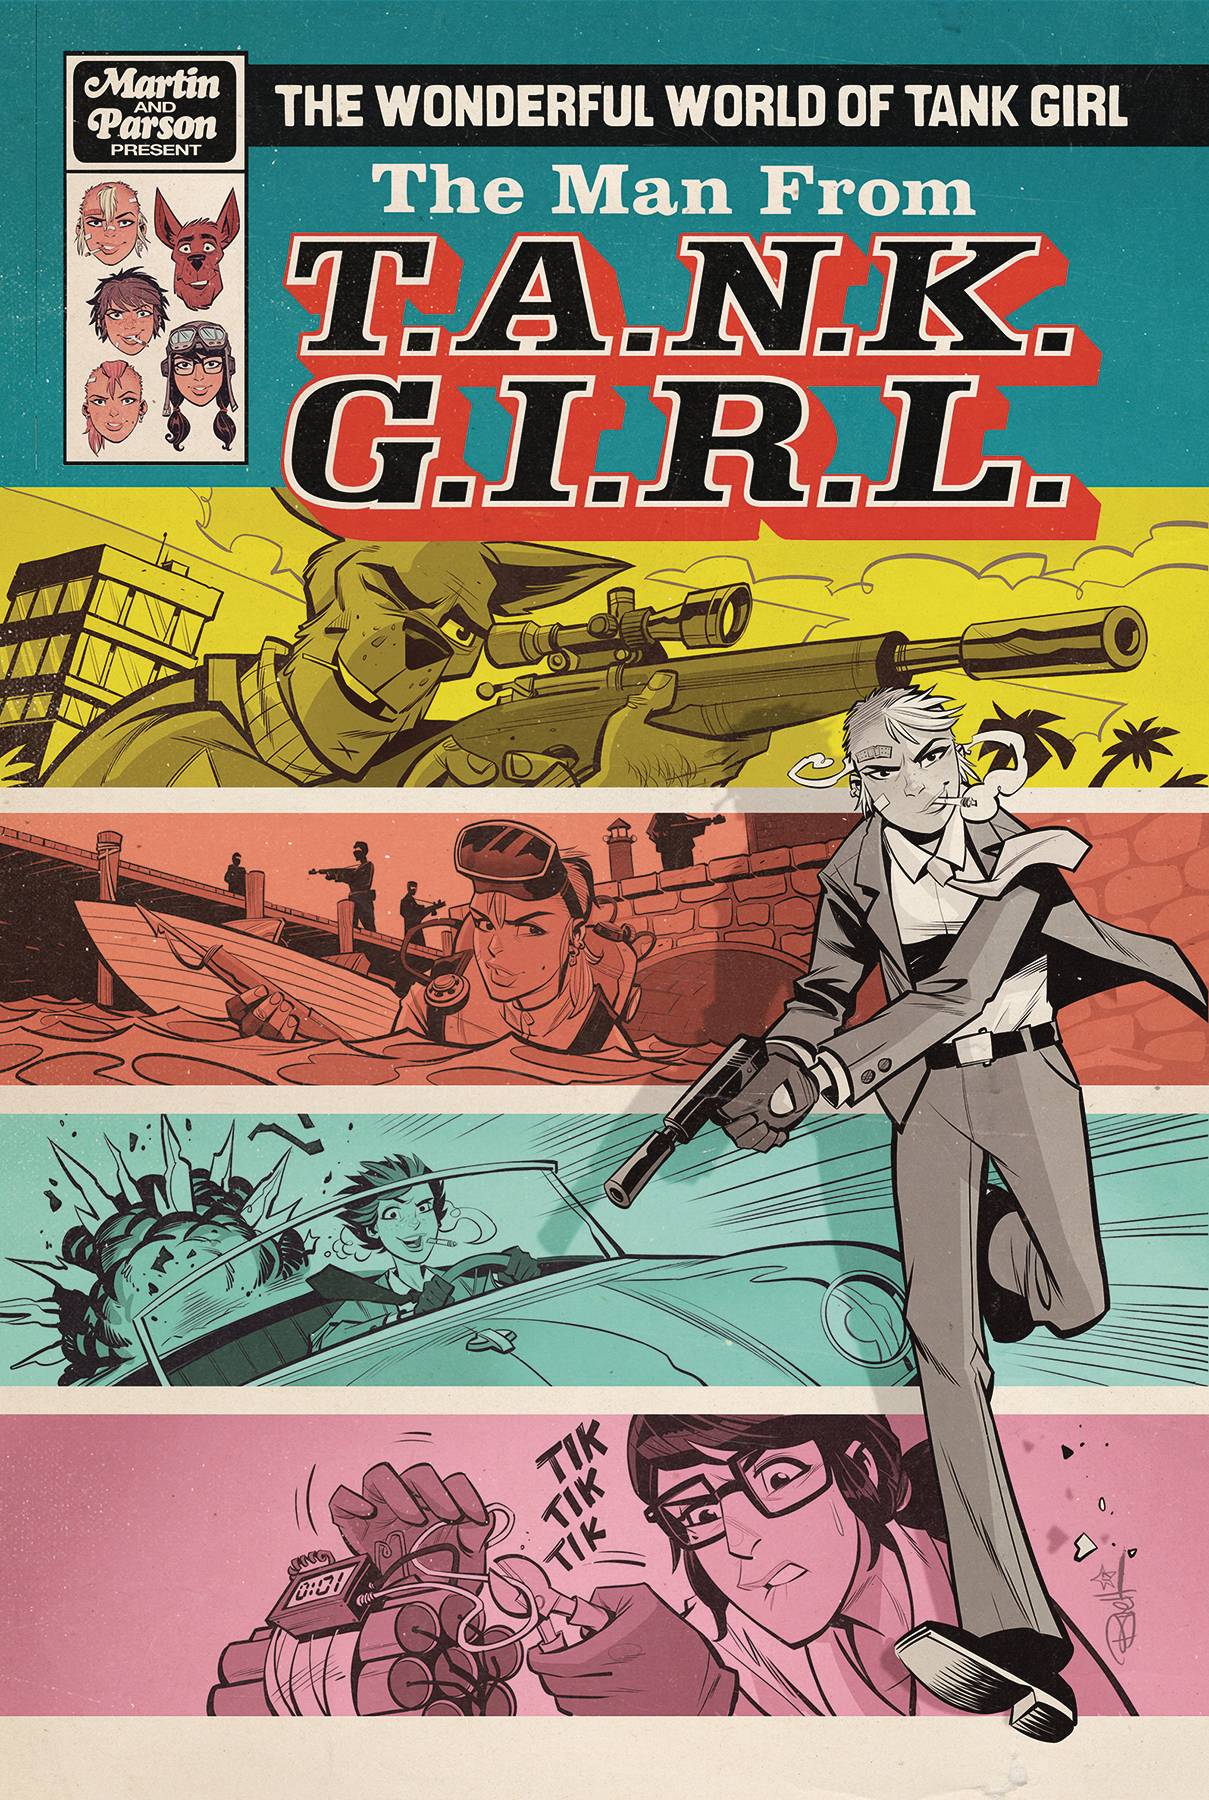 Wonderful World of Tank Girl #3 Cover A Parson